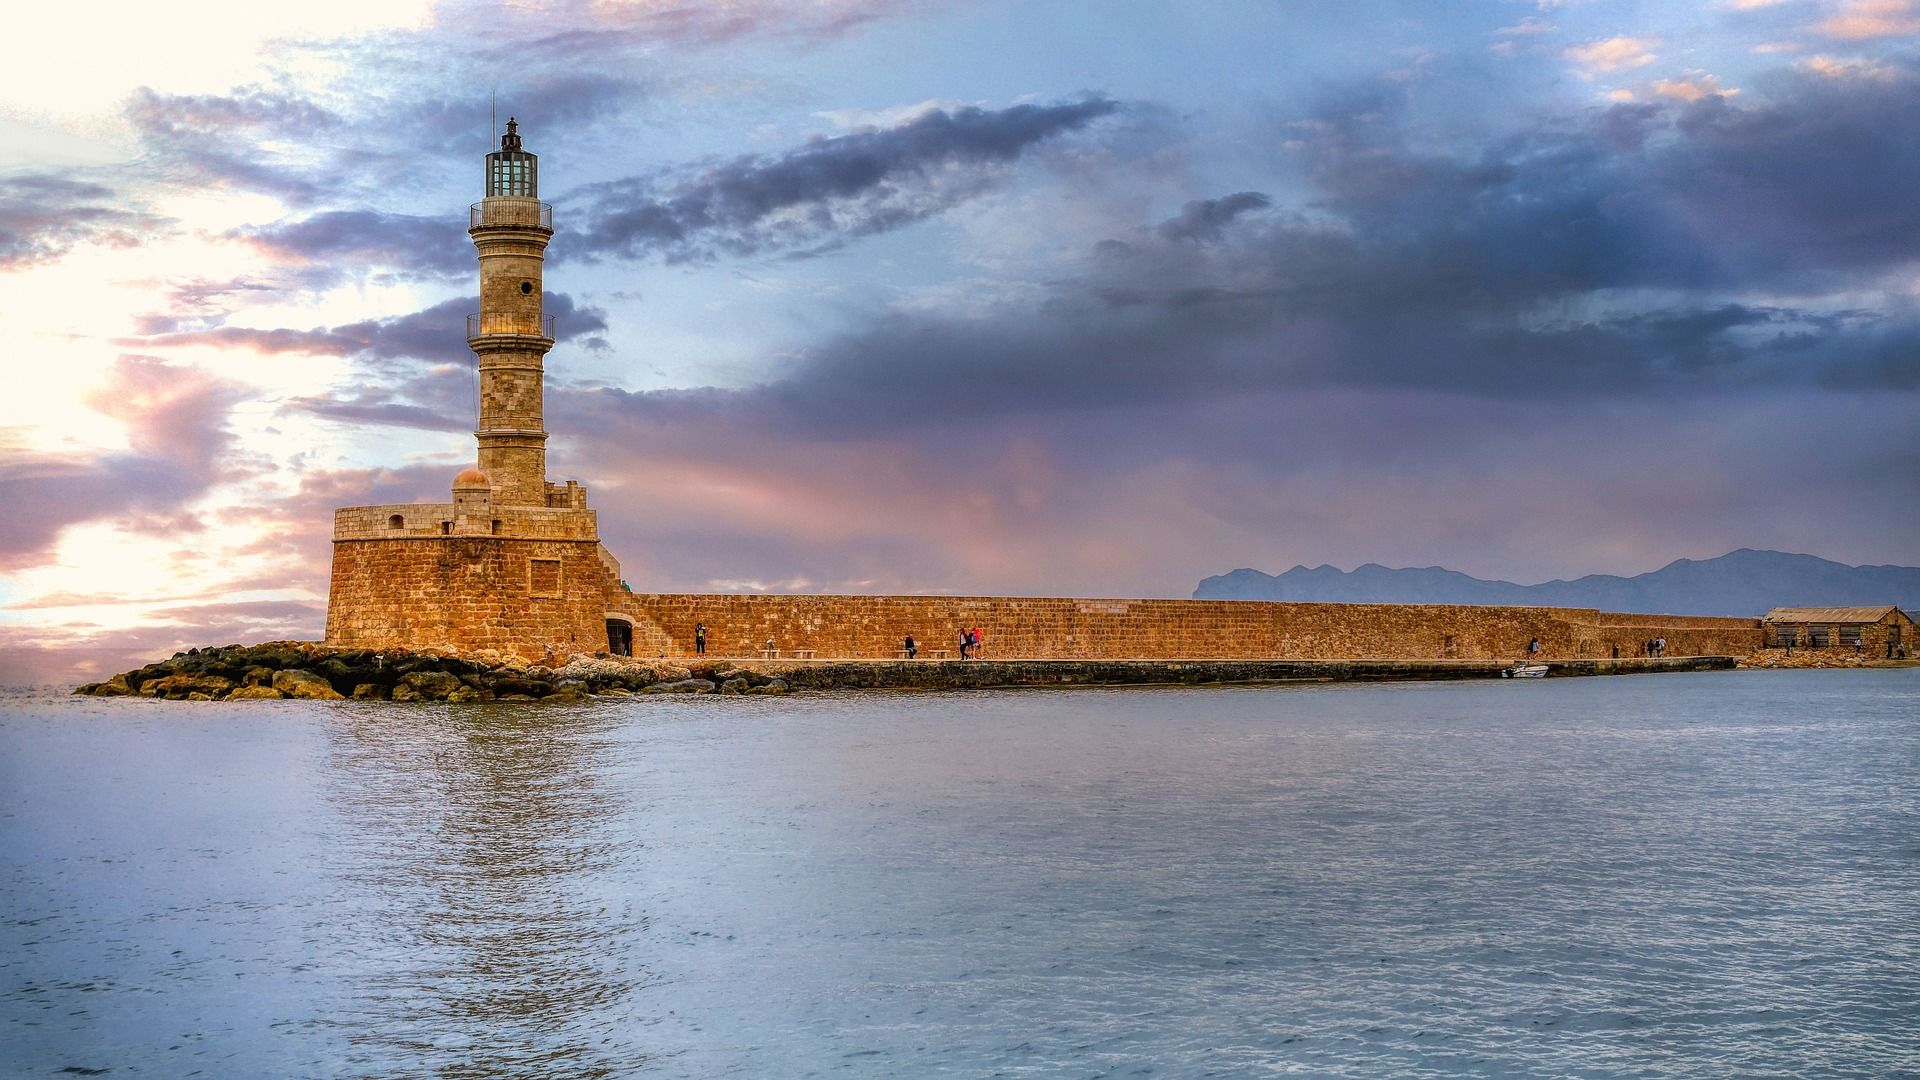 Lighthouse at the Venetian Harbor in Chania, Crete, Greece